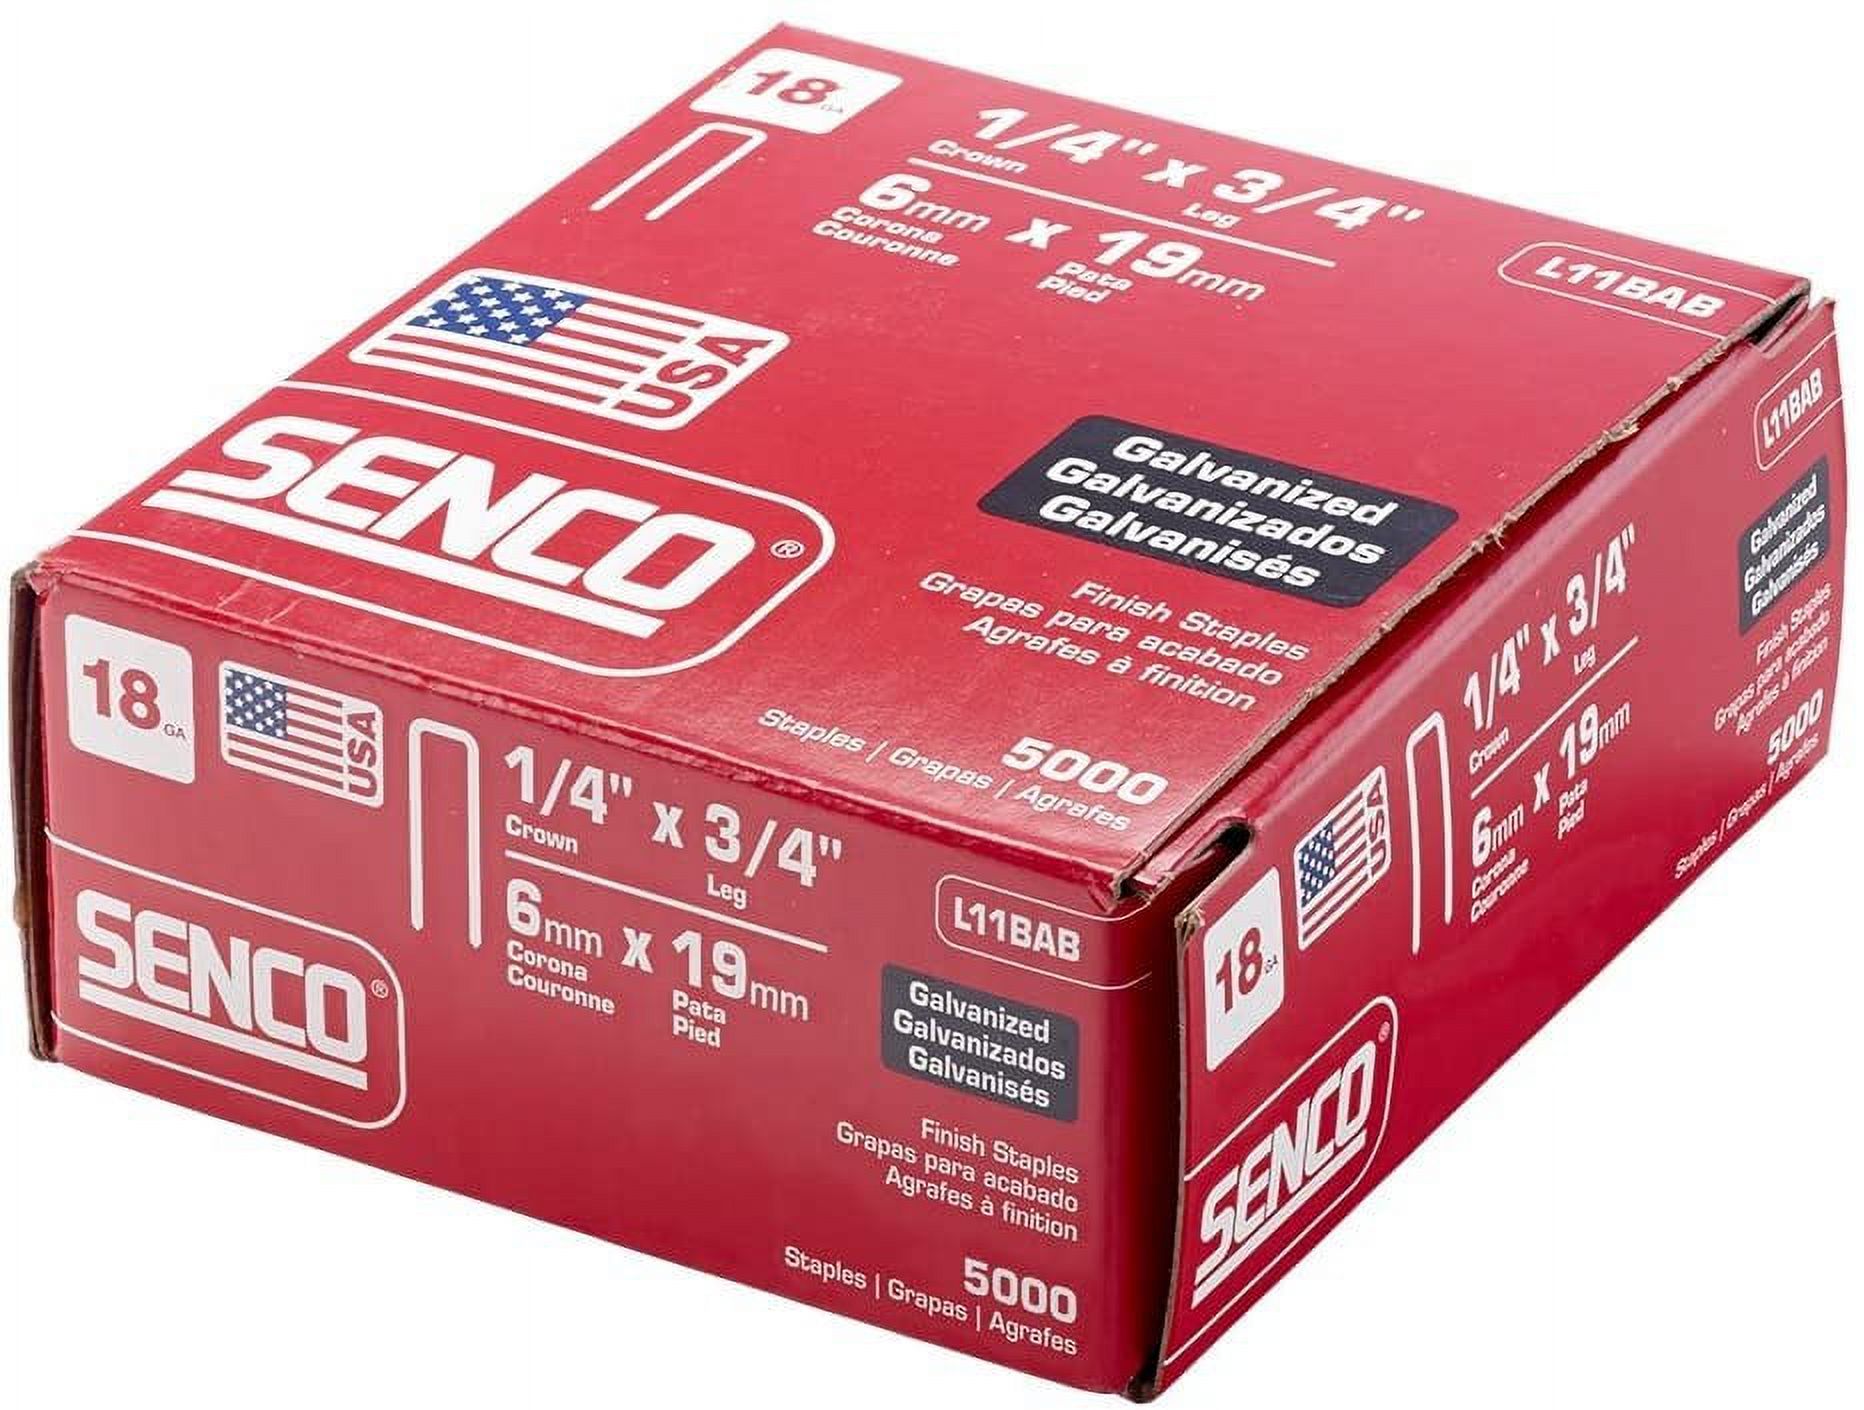 Senco L11BAB 18 Gauge by 1/4-inch Crown by 3/4-inch Leg Electro Galvanized Staples 5,000 per box - image 2 of 2